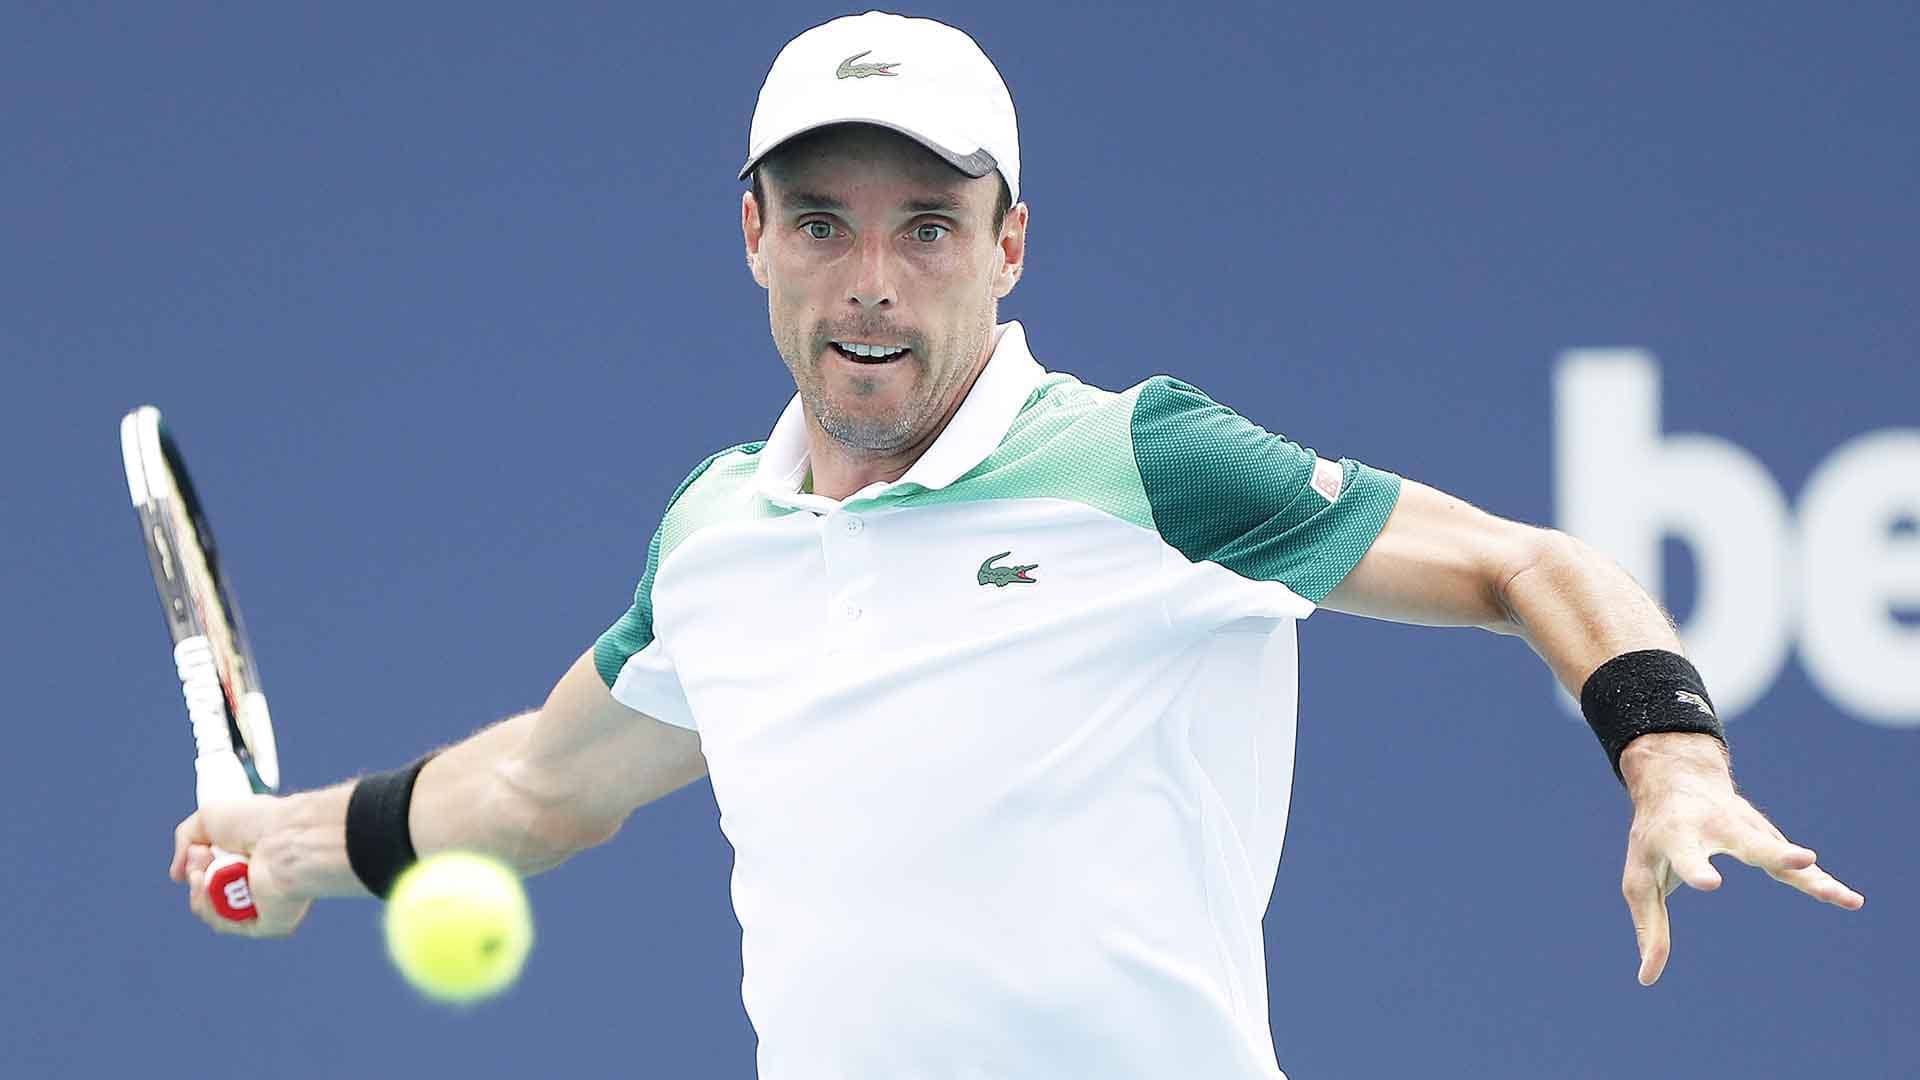 <a href='https://www.atptour.com/en/players/roberto-bautista-agut/bd06/overview'>Roberto Bautista Agut</a> defeated three seeded players en route to the <a href='https://www.atptour.com/en/tournaments/miami/403/overview'>Miami Open presented by Itau</a> semi-finals.